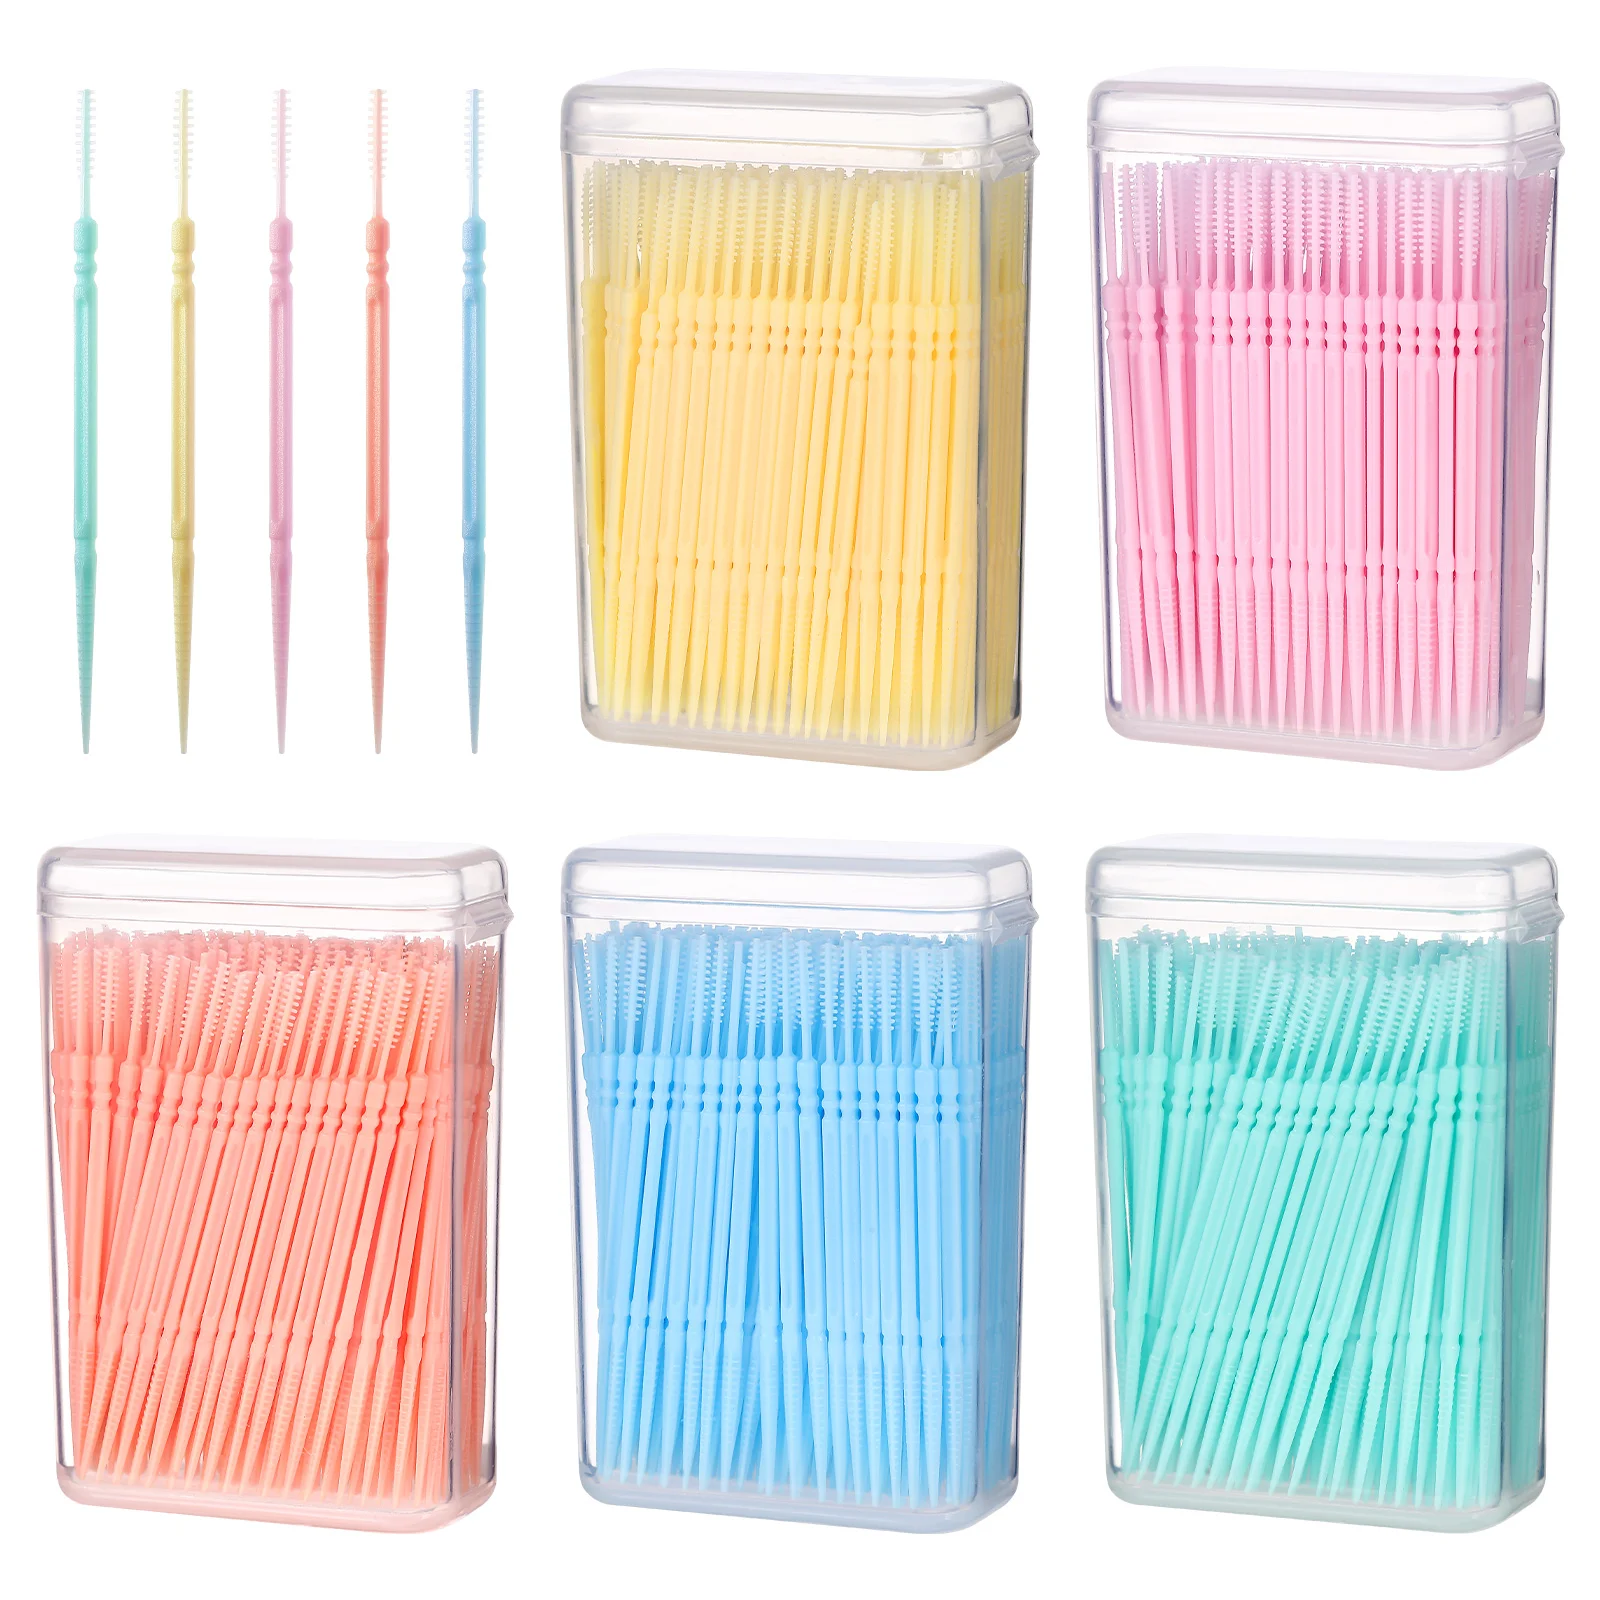 

Floss Picks Interdental Teeth Disposable Toothpick Stick Brush Cleaners Double-headed Oral Care Toothpicks Toothbrushes